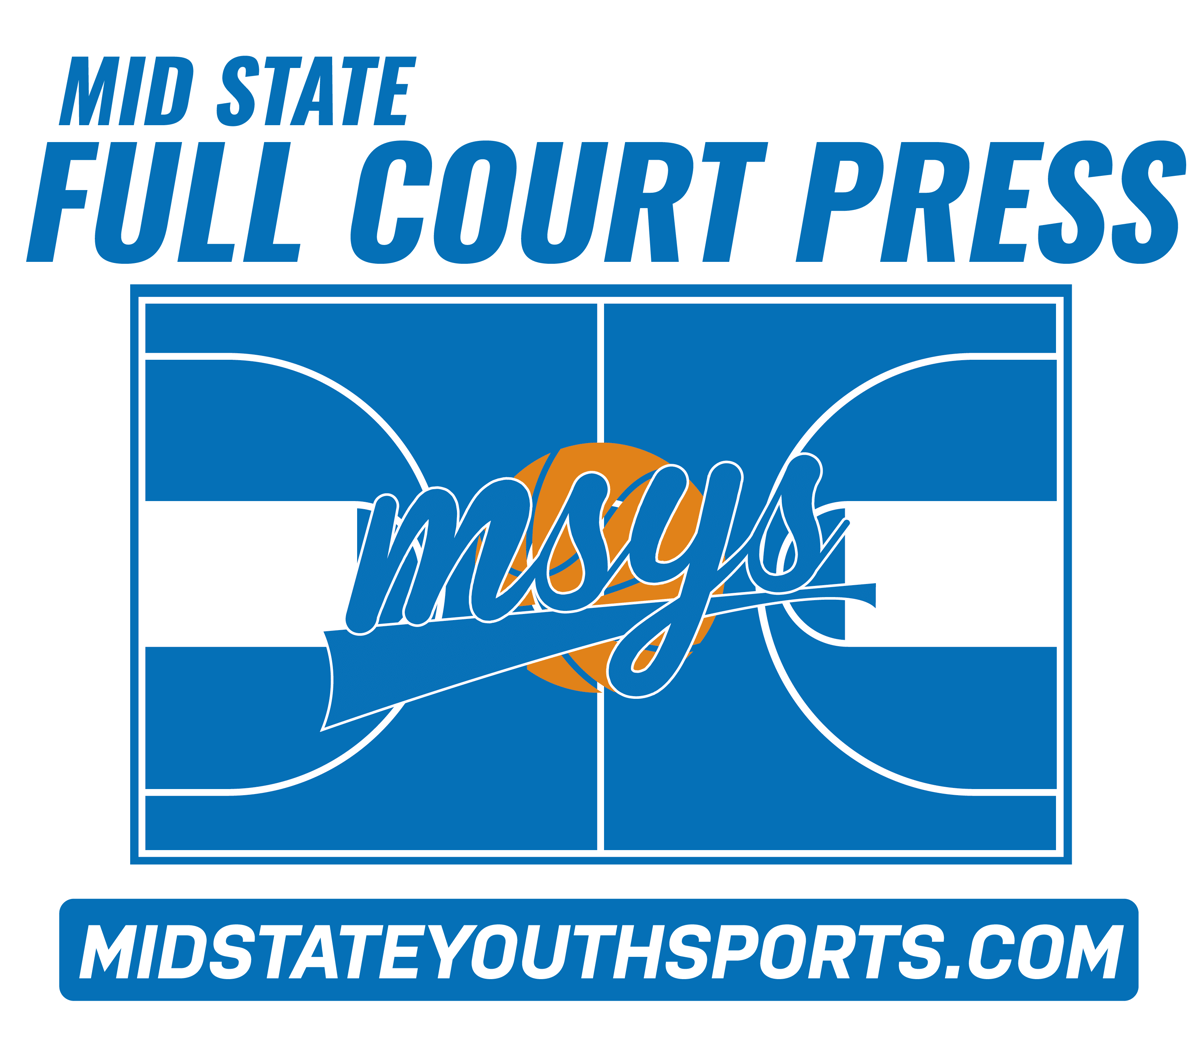 MSYS 10th Annual Mid State Full Court Press